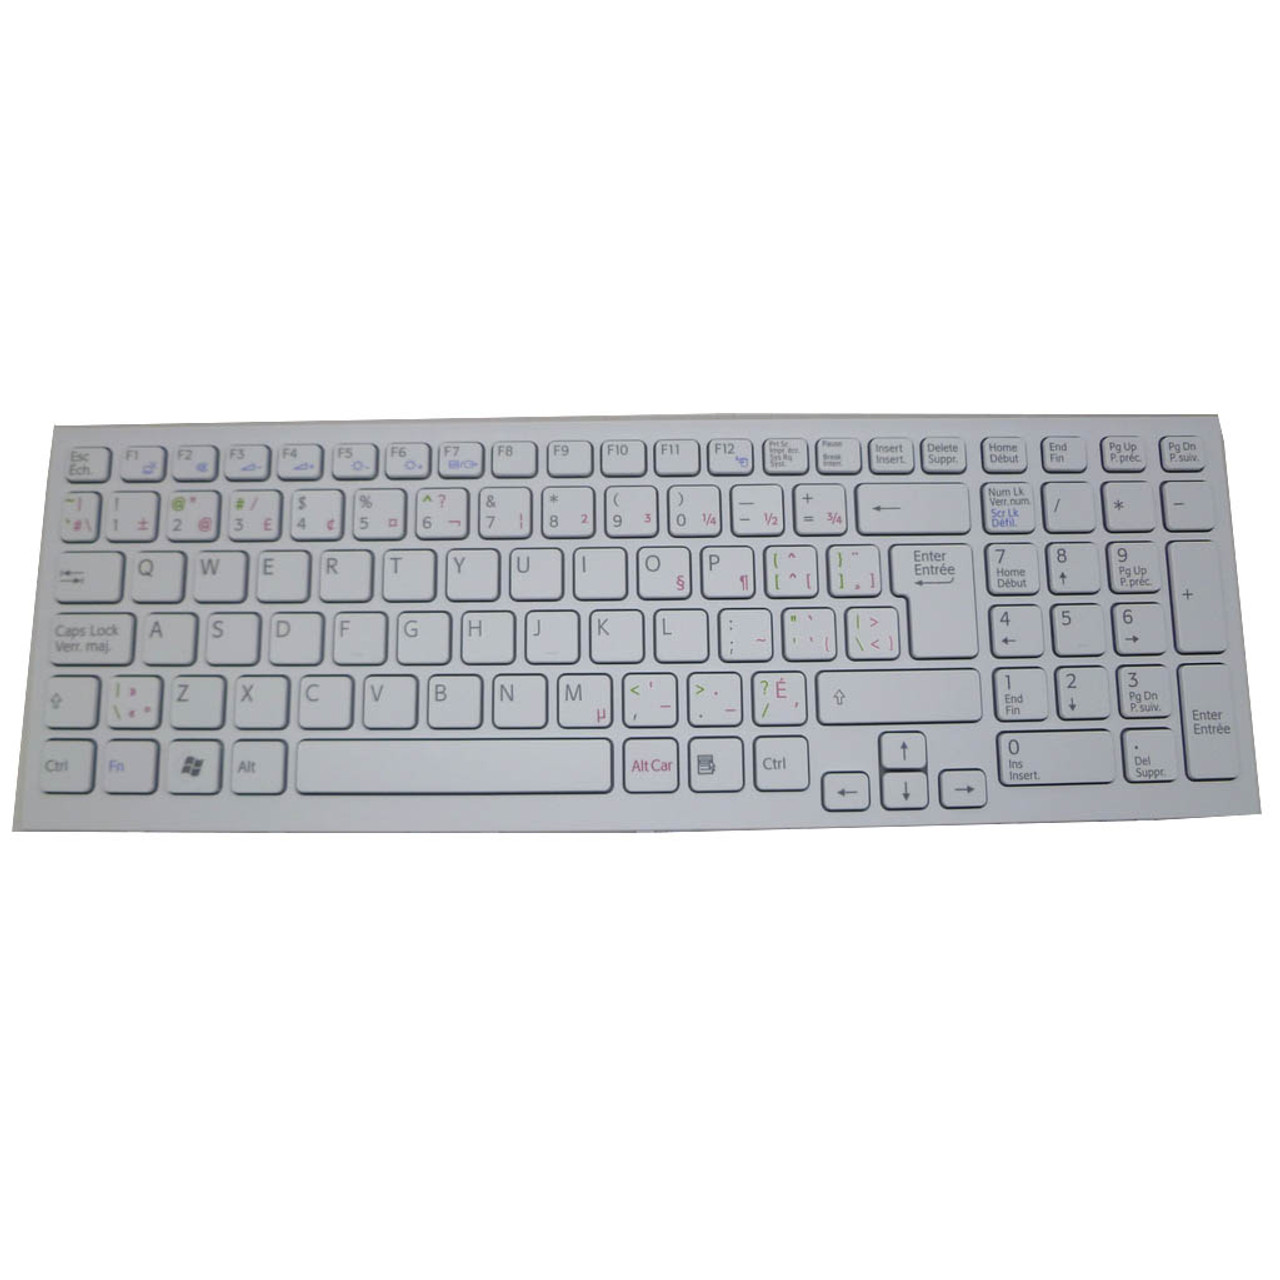 Laptop Keyboard For SONY For VAIO VPC-EH VPCEH VPCEH25FD VPCEH27FD  VPCEH290S VPCEH31FD VPCEH33FD VPCEH35FD Canada CA White With Frame New